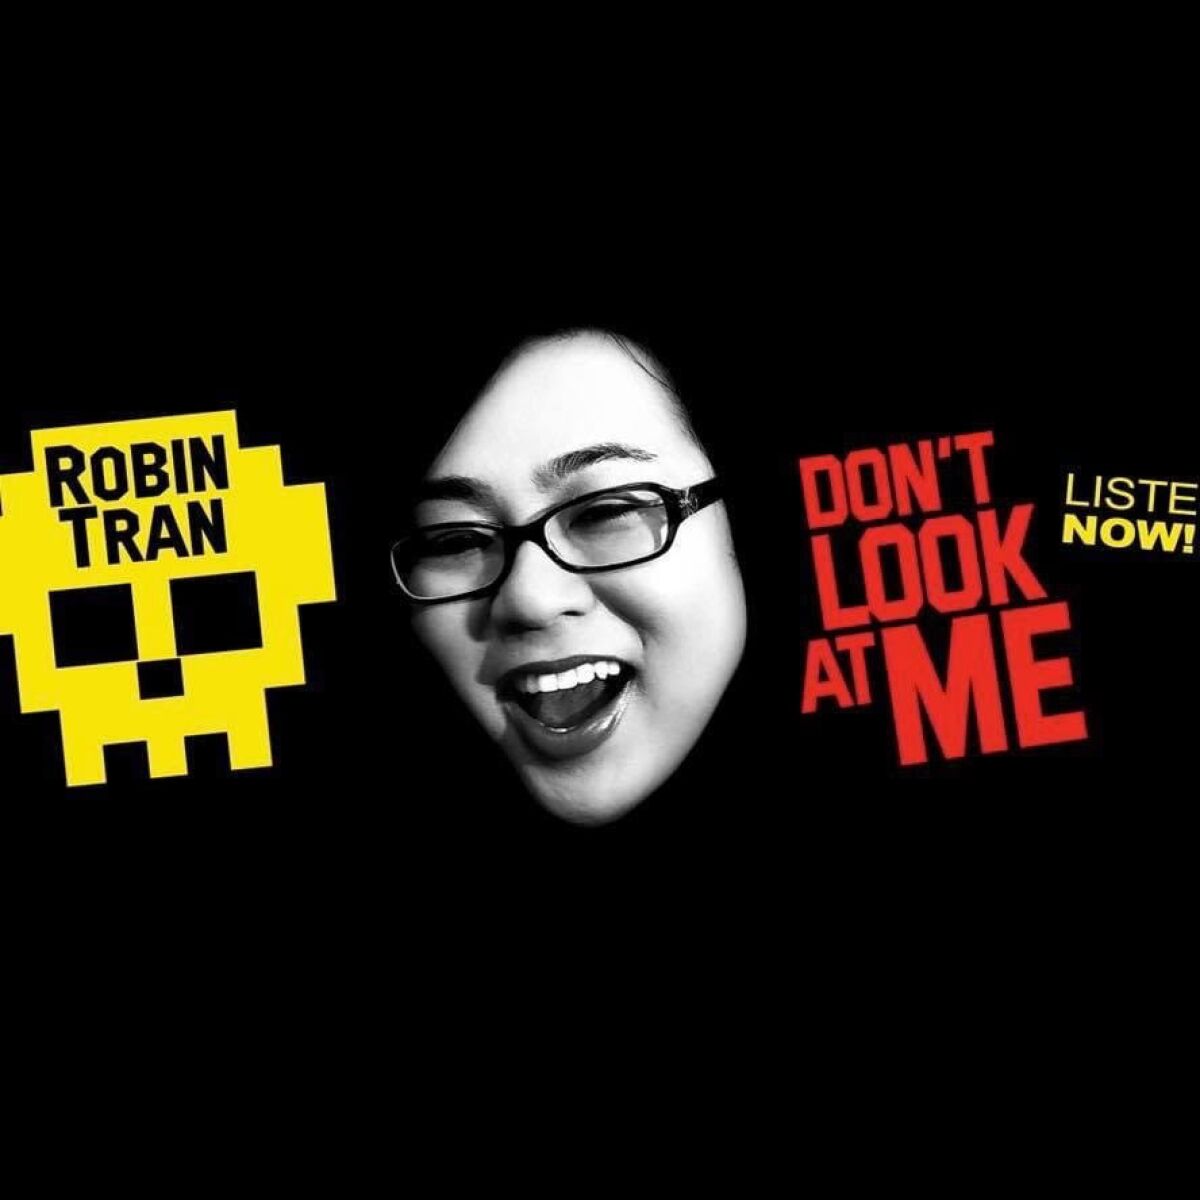 Cover art for "Don't Look at Me," comedian Robin Tran's album.